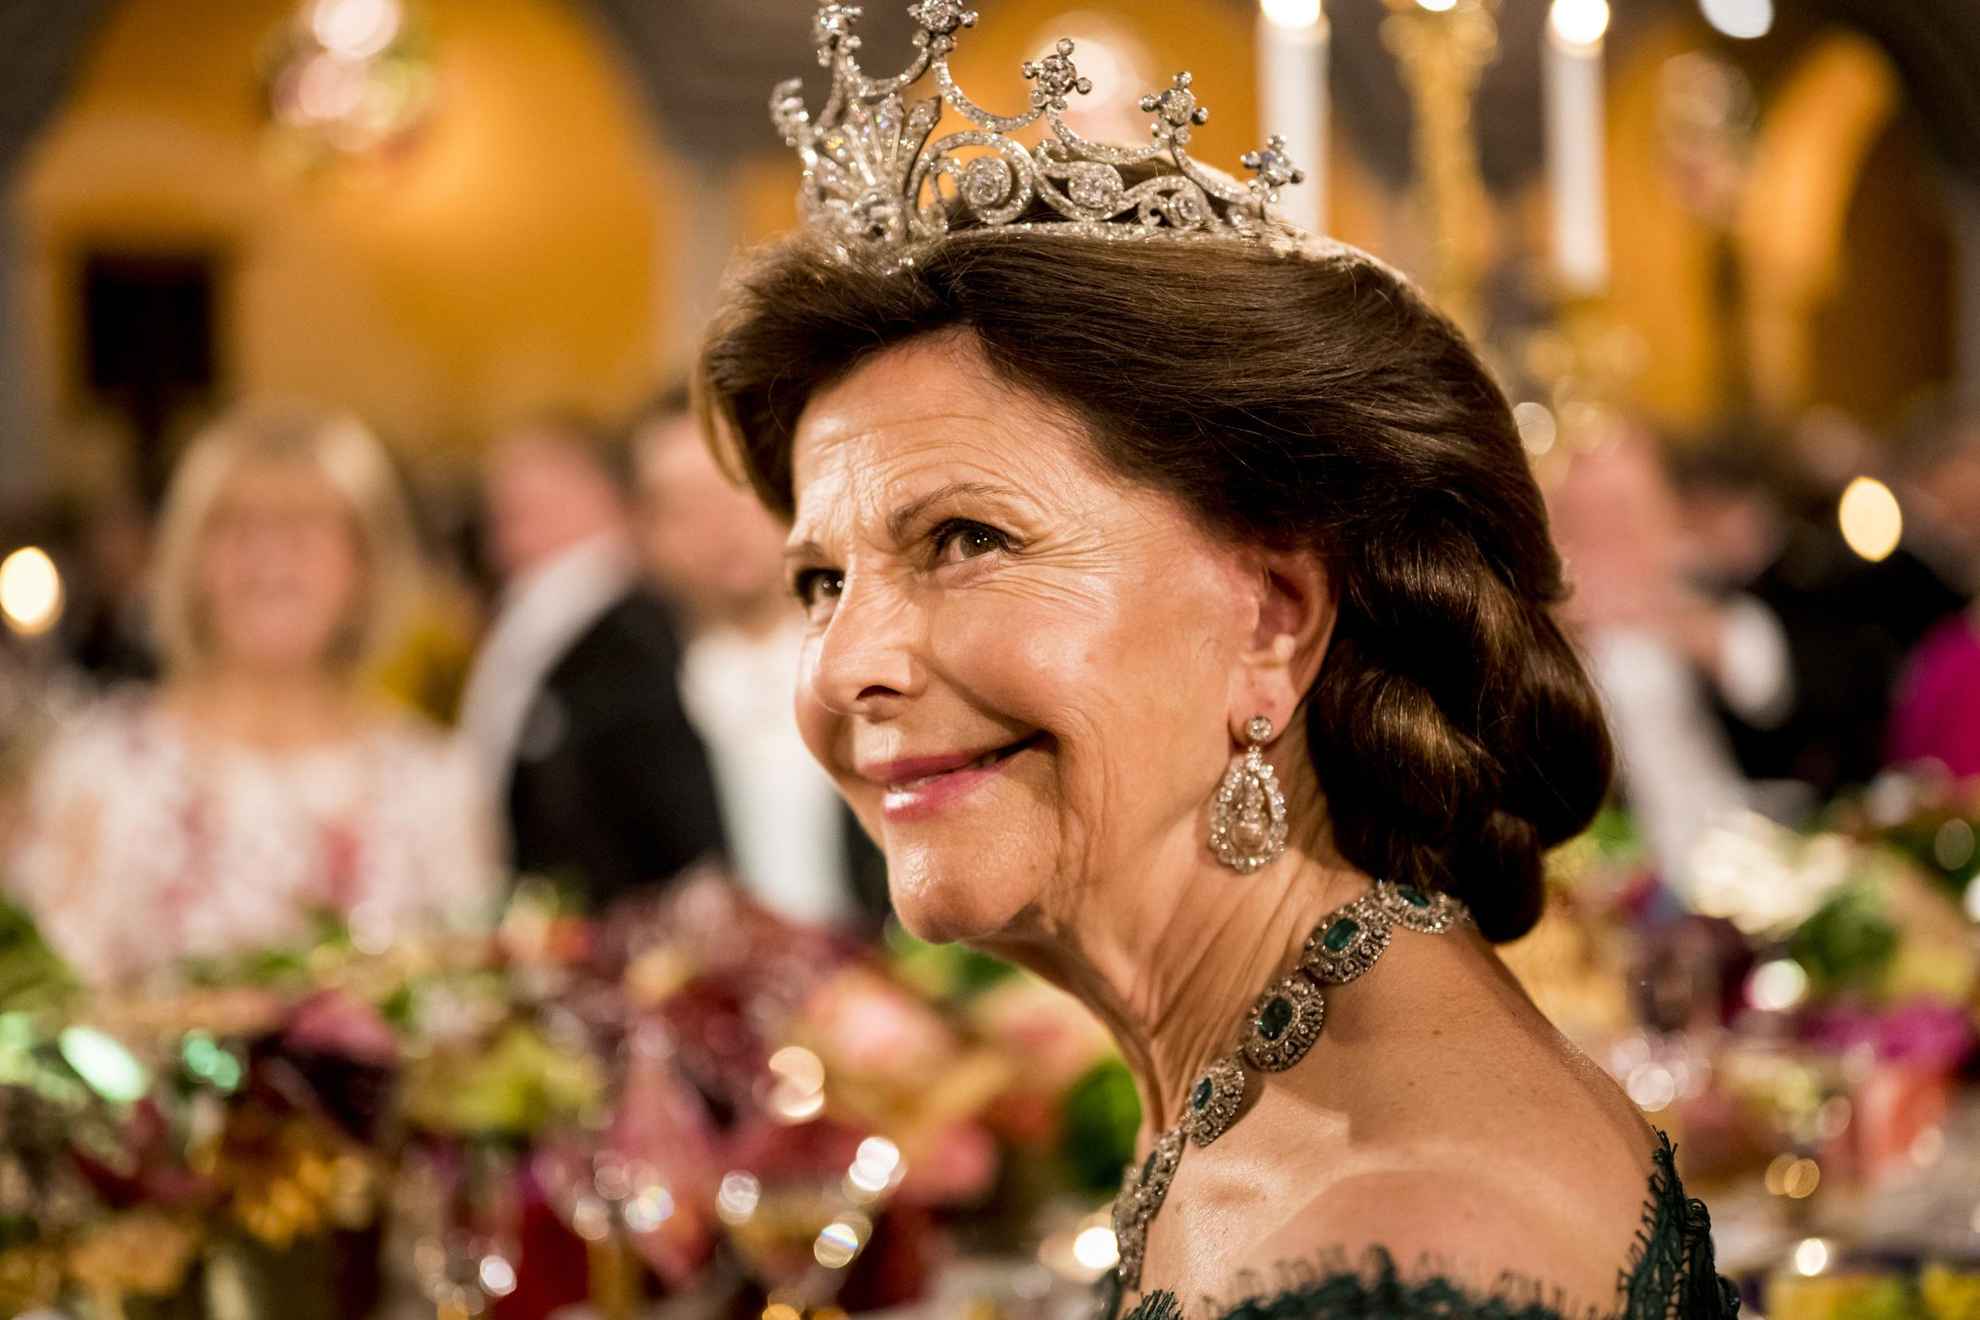 A picture of Silvia, the Queen of Sweden, at the Nobel banquet.